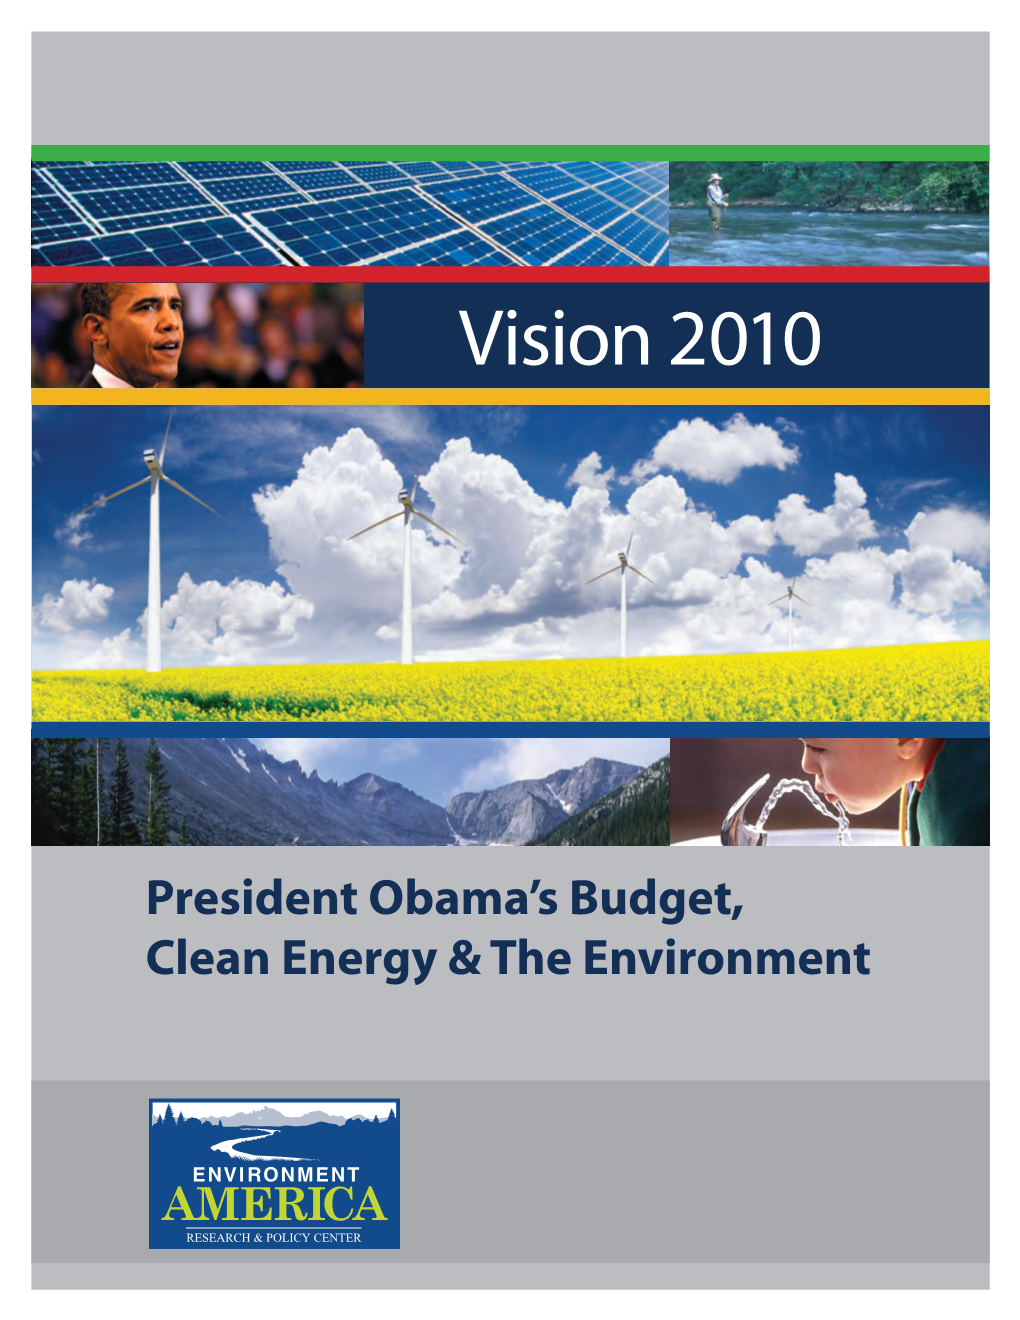 President Obama's Budget, Clean Energy and the Environment